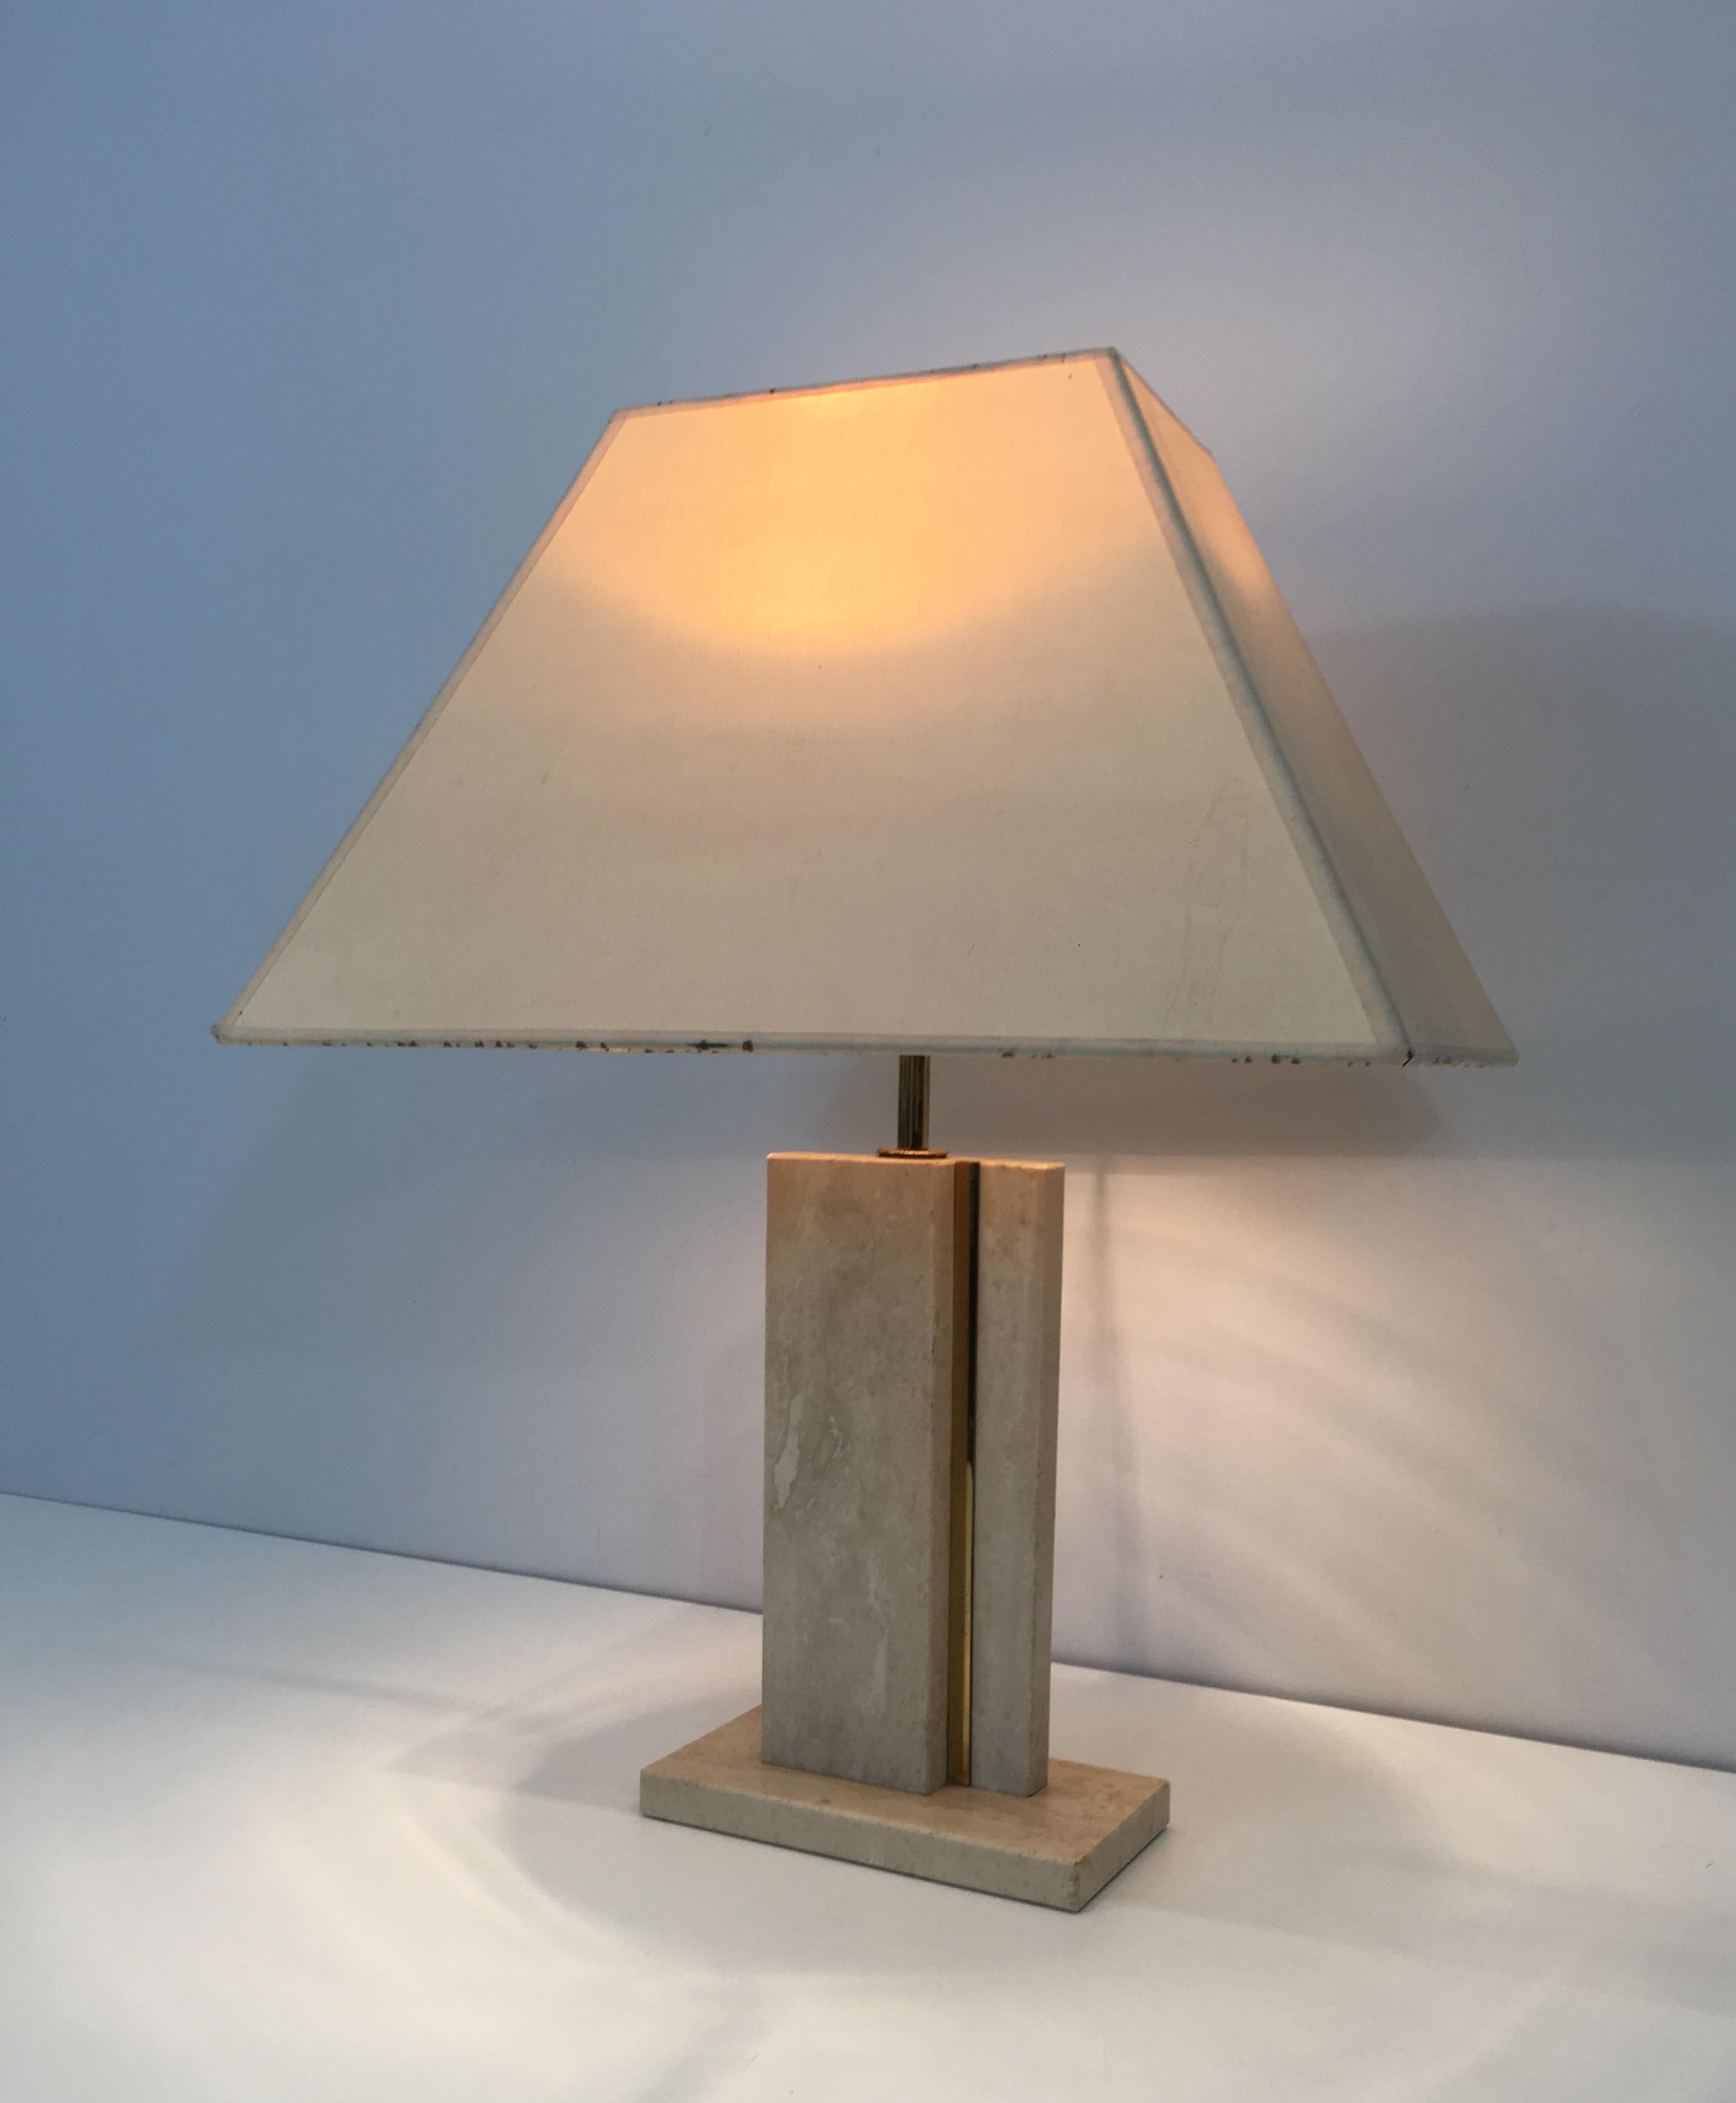 Travertine and Brass Table Lamp with Original Shade, French, circa 1970 For Sale 4